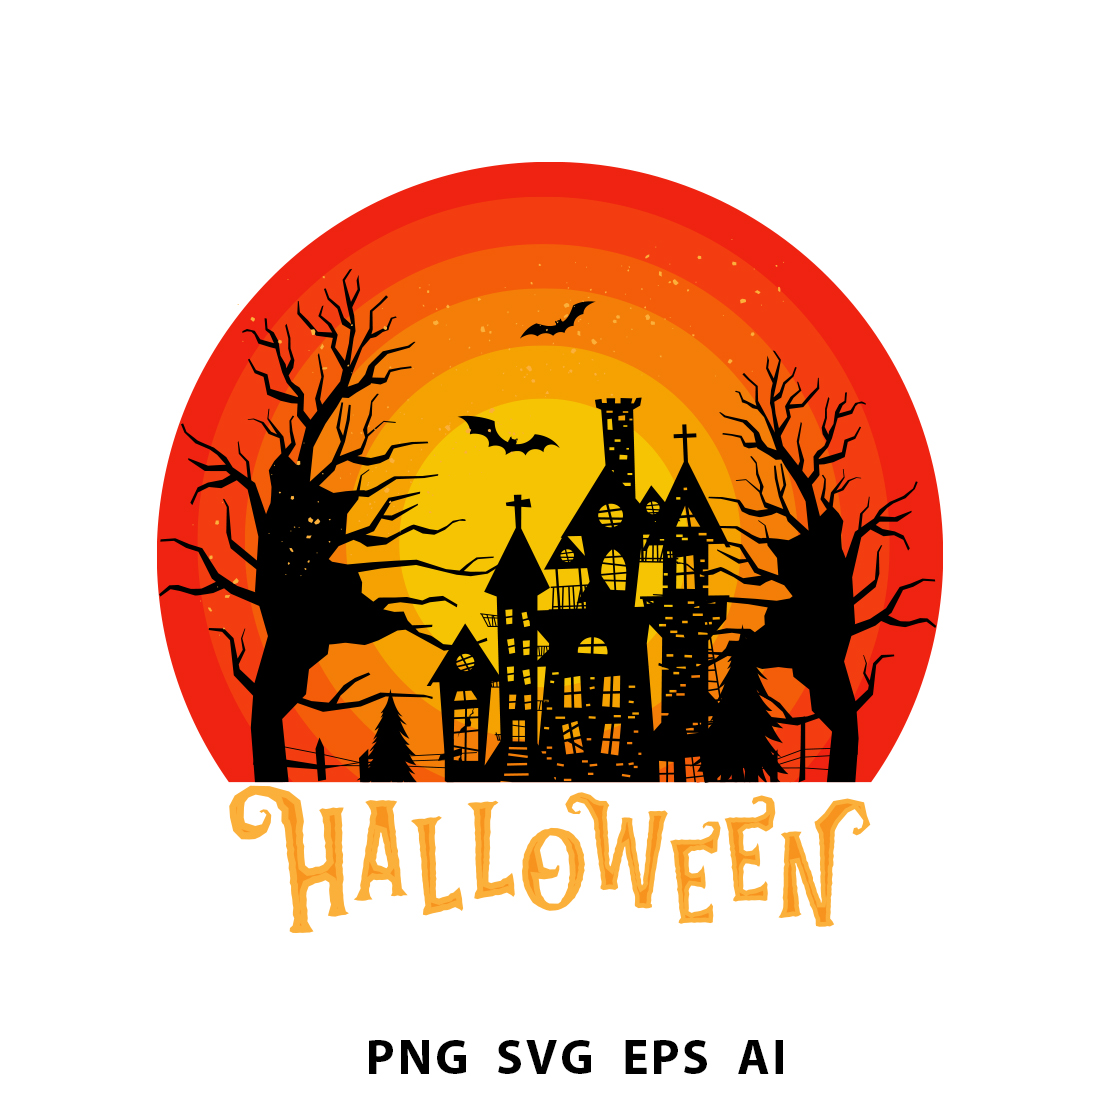 Halloween T shirt design, scary night preview image.